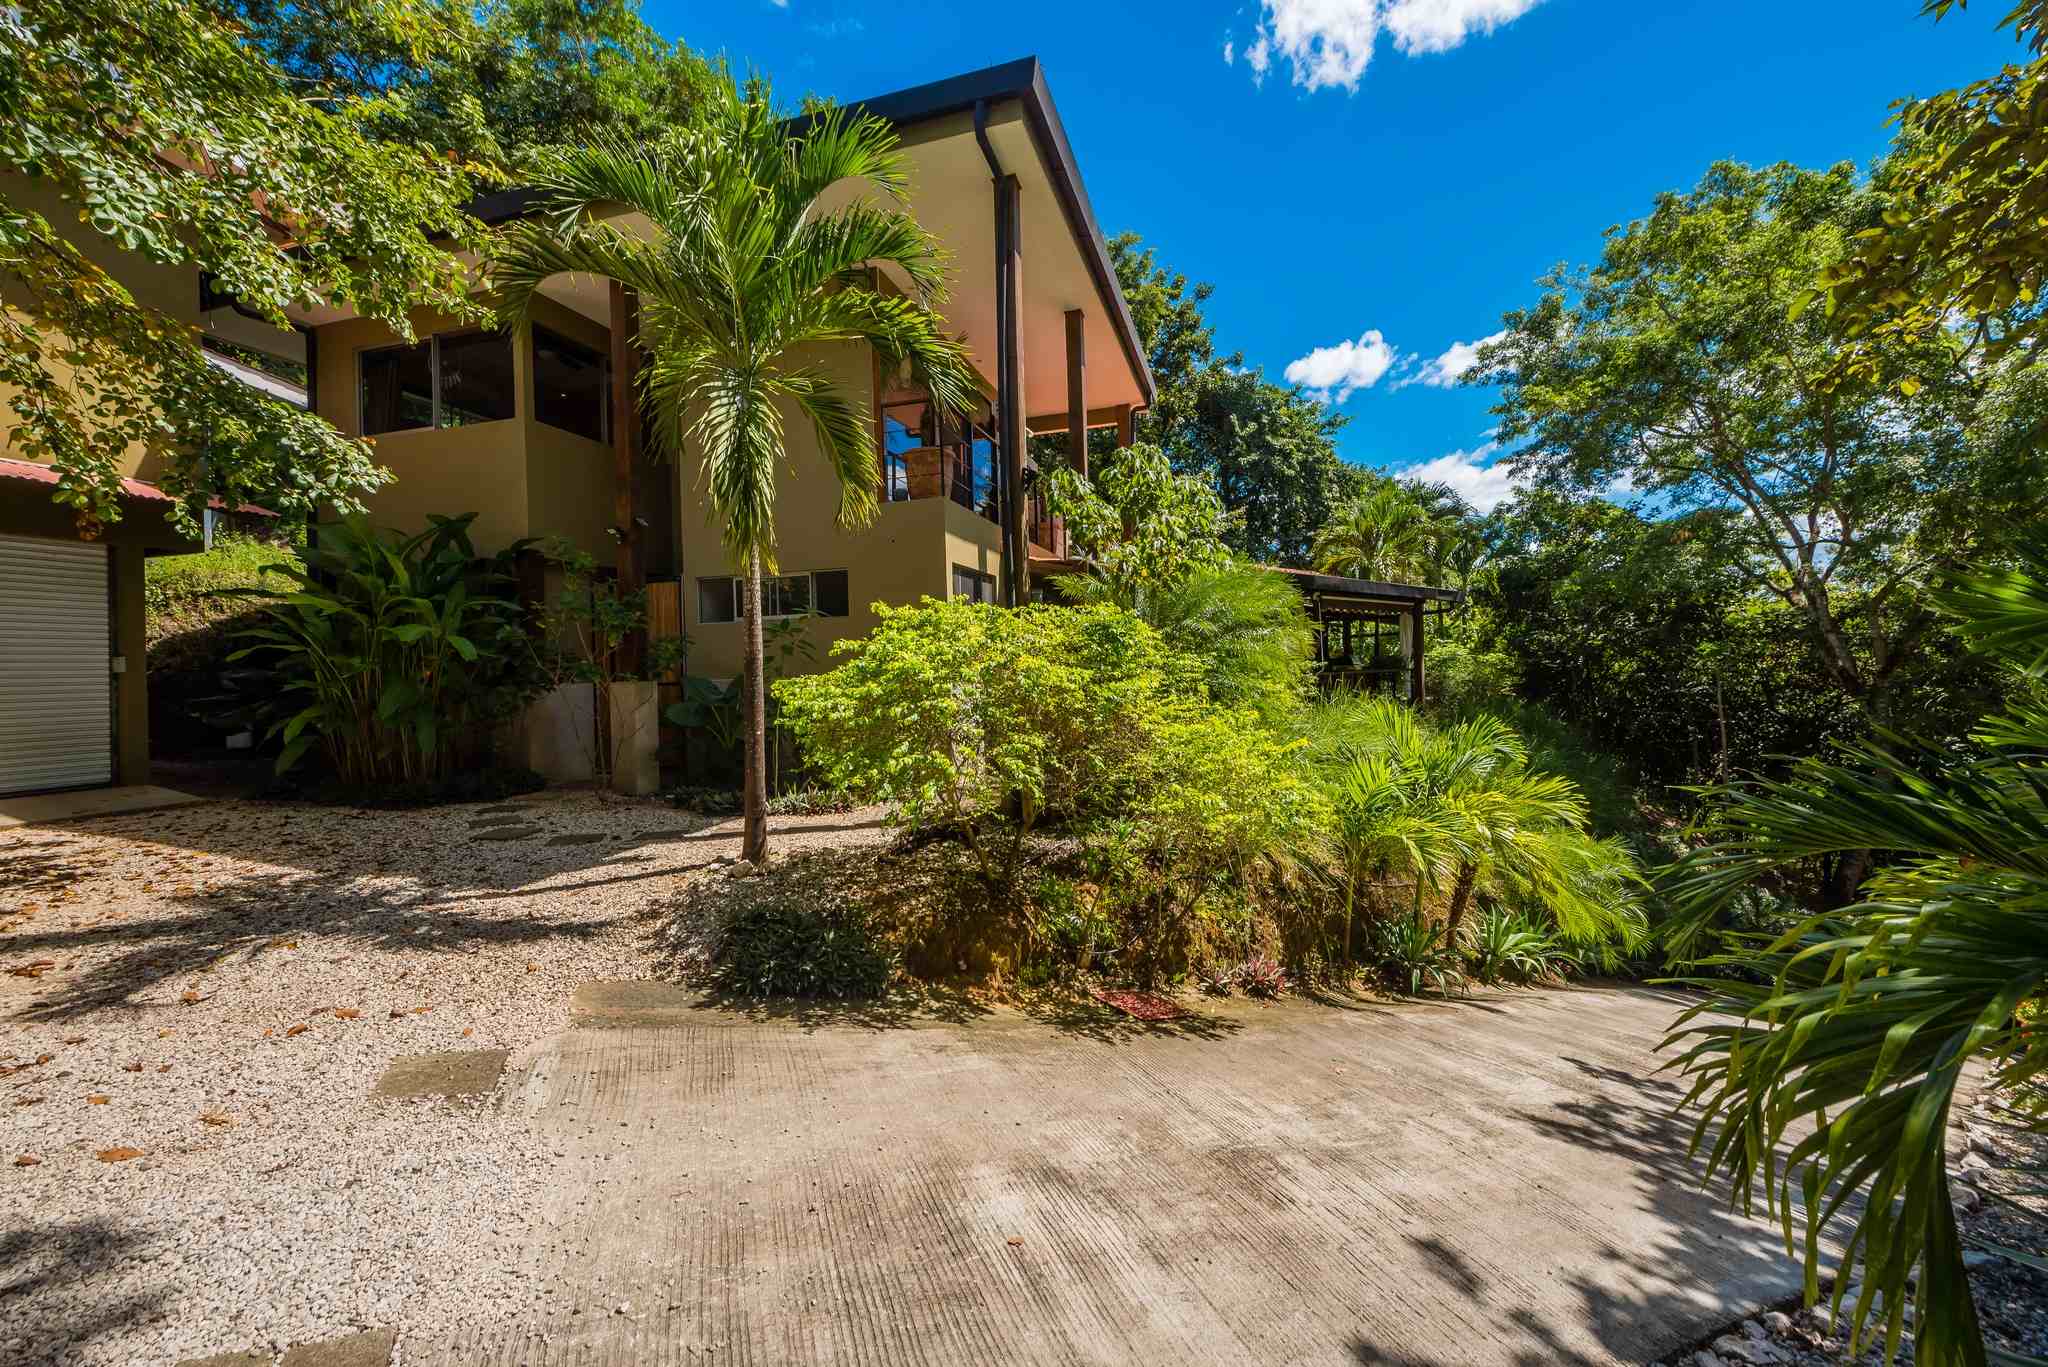 Benefits of finding great homes for sale Costa Rica